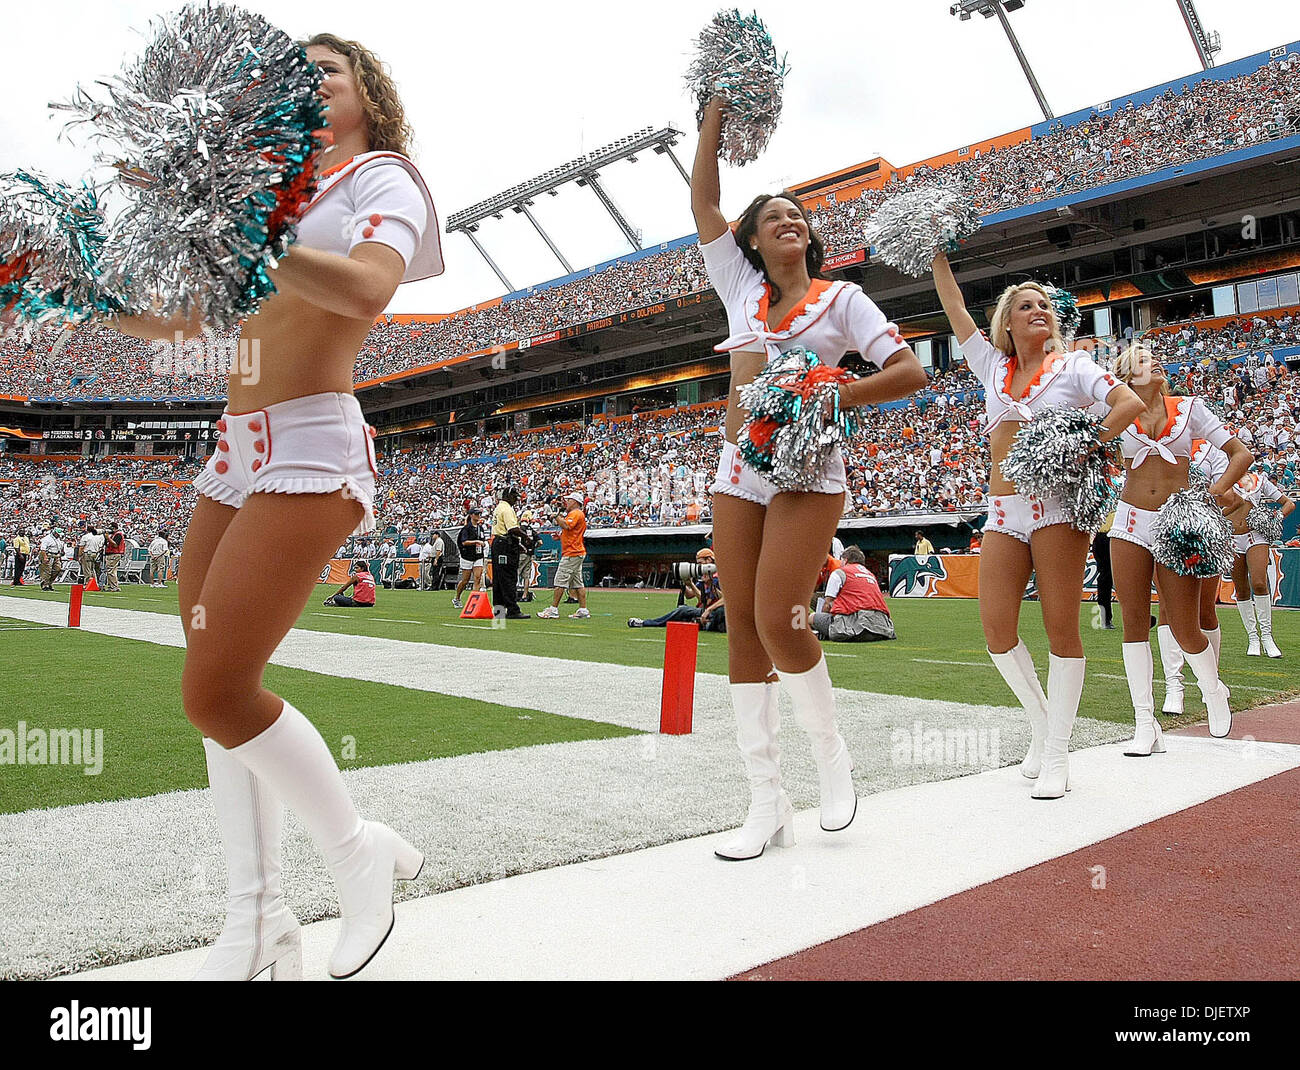 Oct 21, 2007 - Miami Gardens, Florida, USA - Dolphins cheerleaders during the fins game against the New England Patriots Sunday at Dolphin Stadium. New England defeated the Dolphins 49-28. (Credit Image: © Bill Ingram/Palm Beach Post/ZUMA Press) RESTRICTIONS: USA Tabloid RIGHTS OUT! Stock Photo